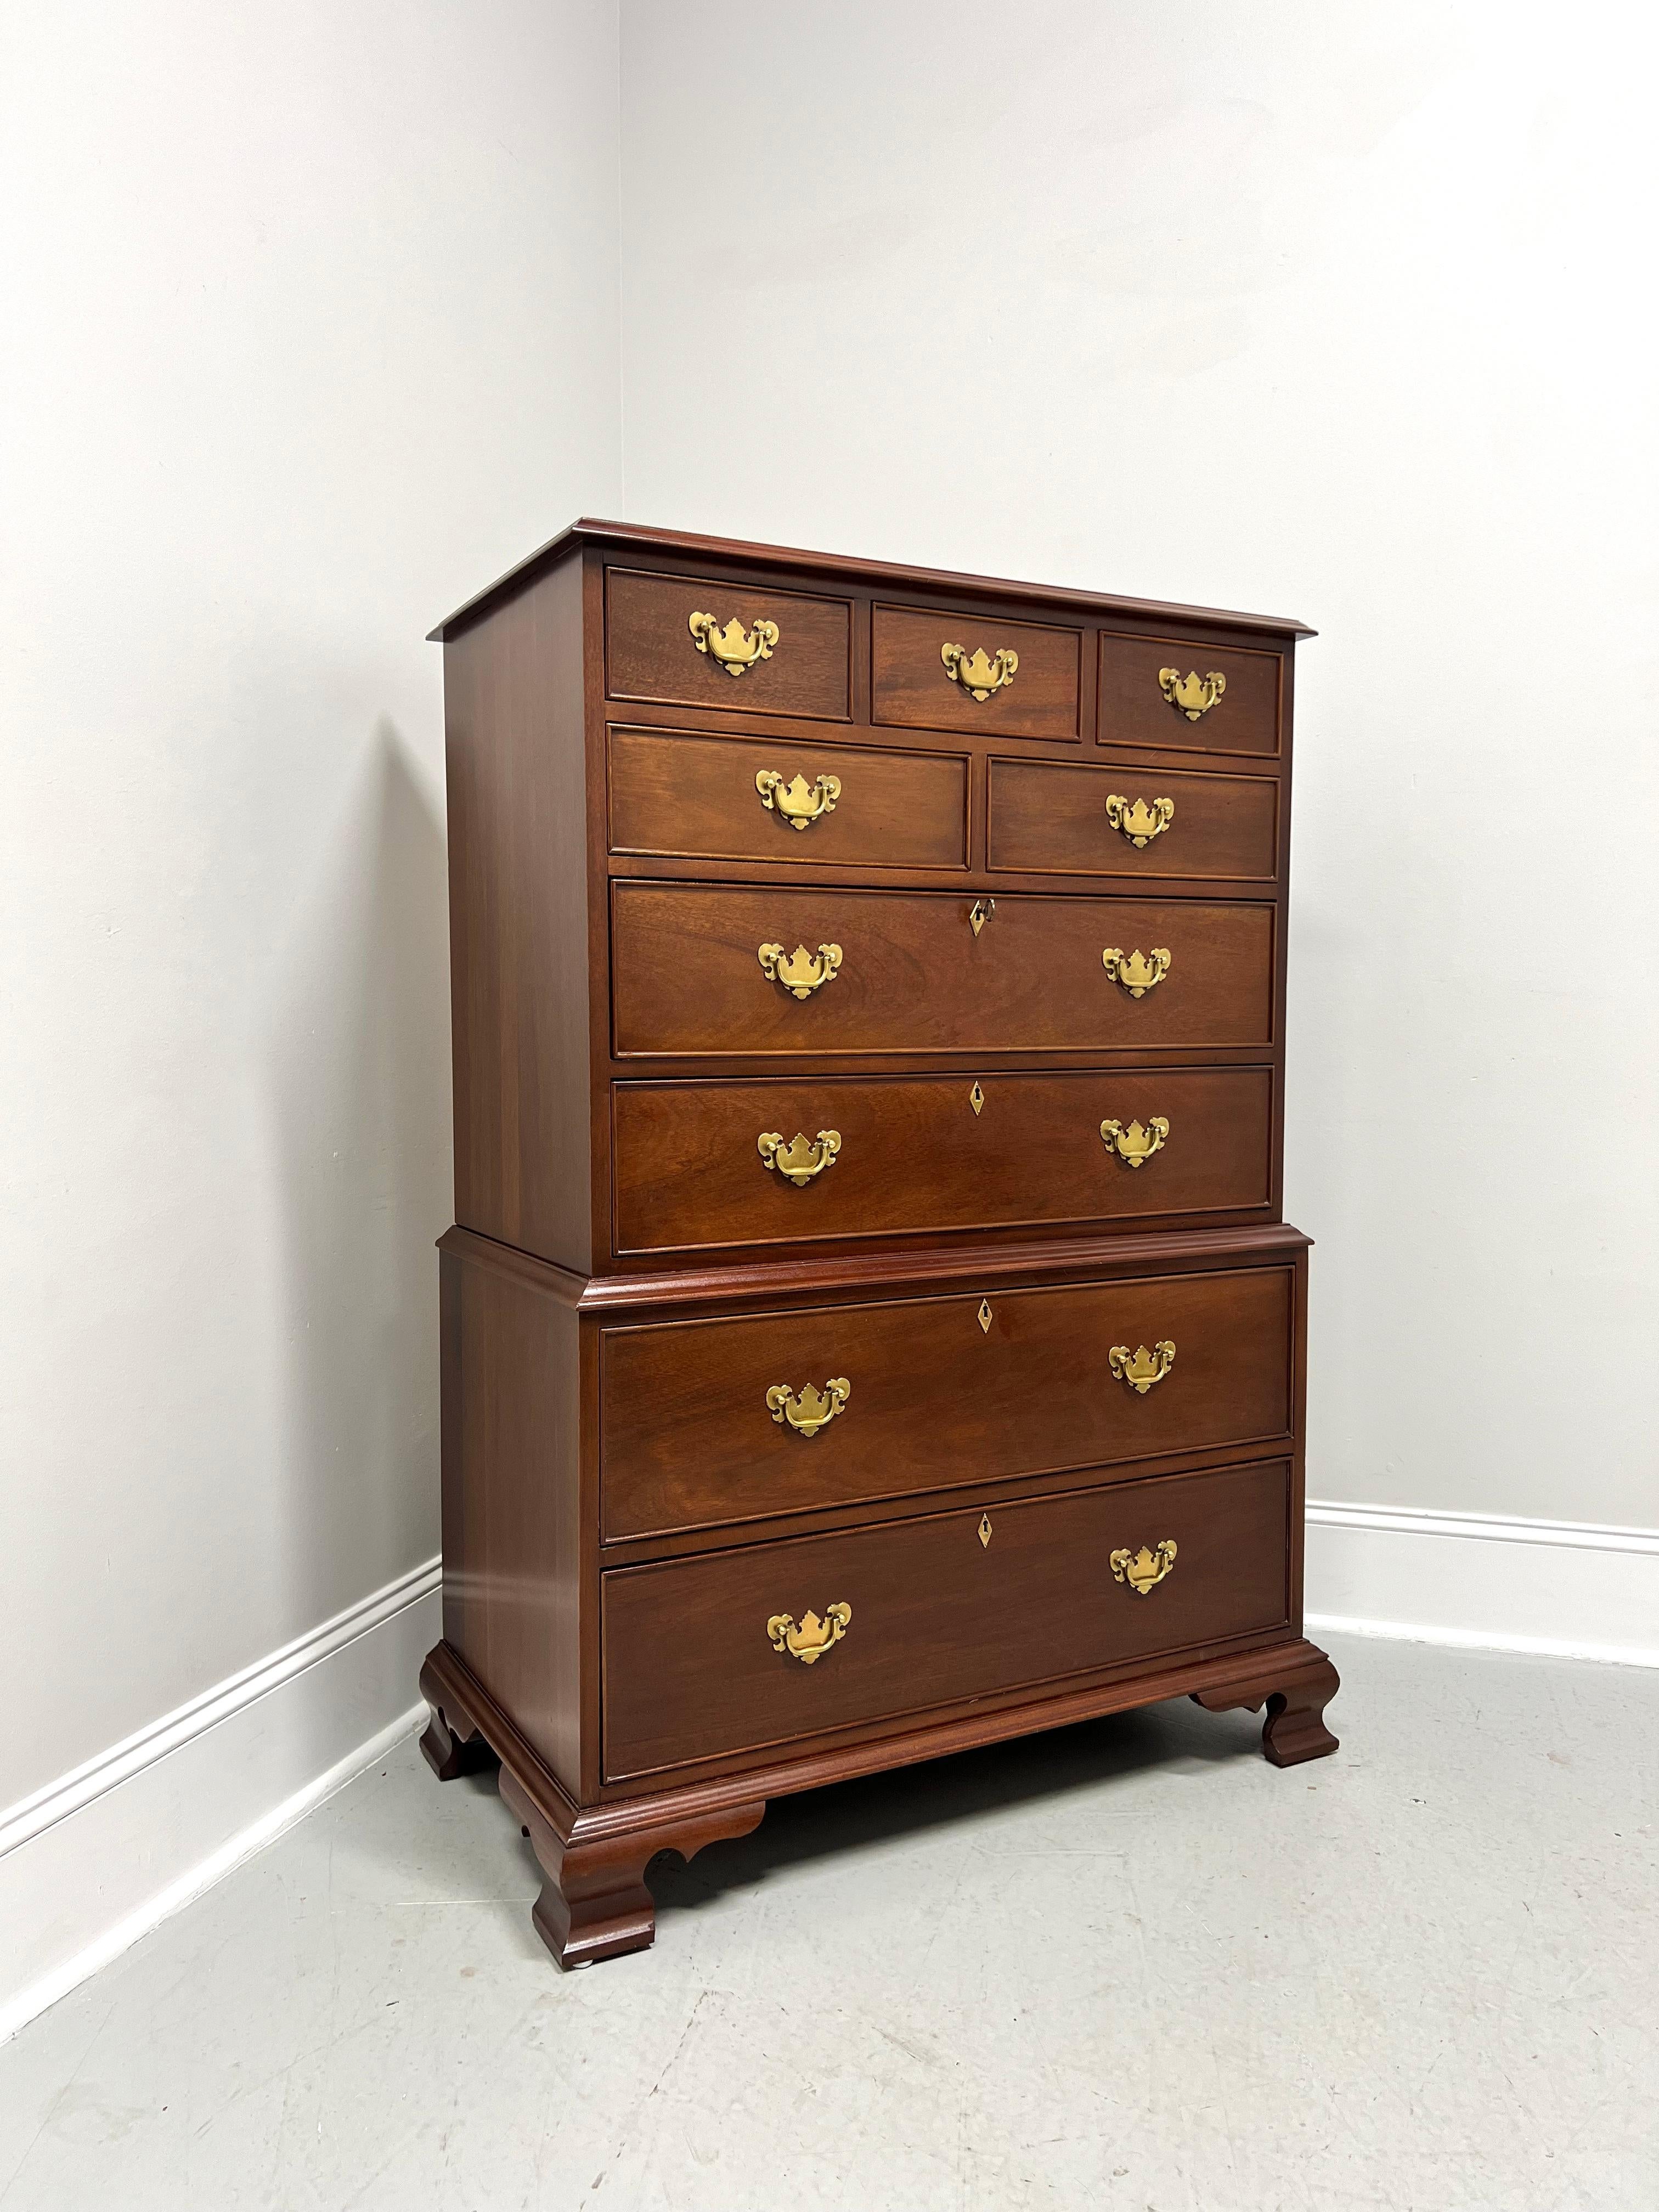 A Chippendale style chest on chest by high-quality furniture maker Craftique. Solid mahogany with their Old Wood finish, brass hardware, ogee edge to the top, brass keyhole escutcheons, and ogee bracket feet. Features nine various size drawers of